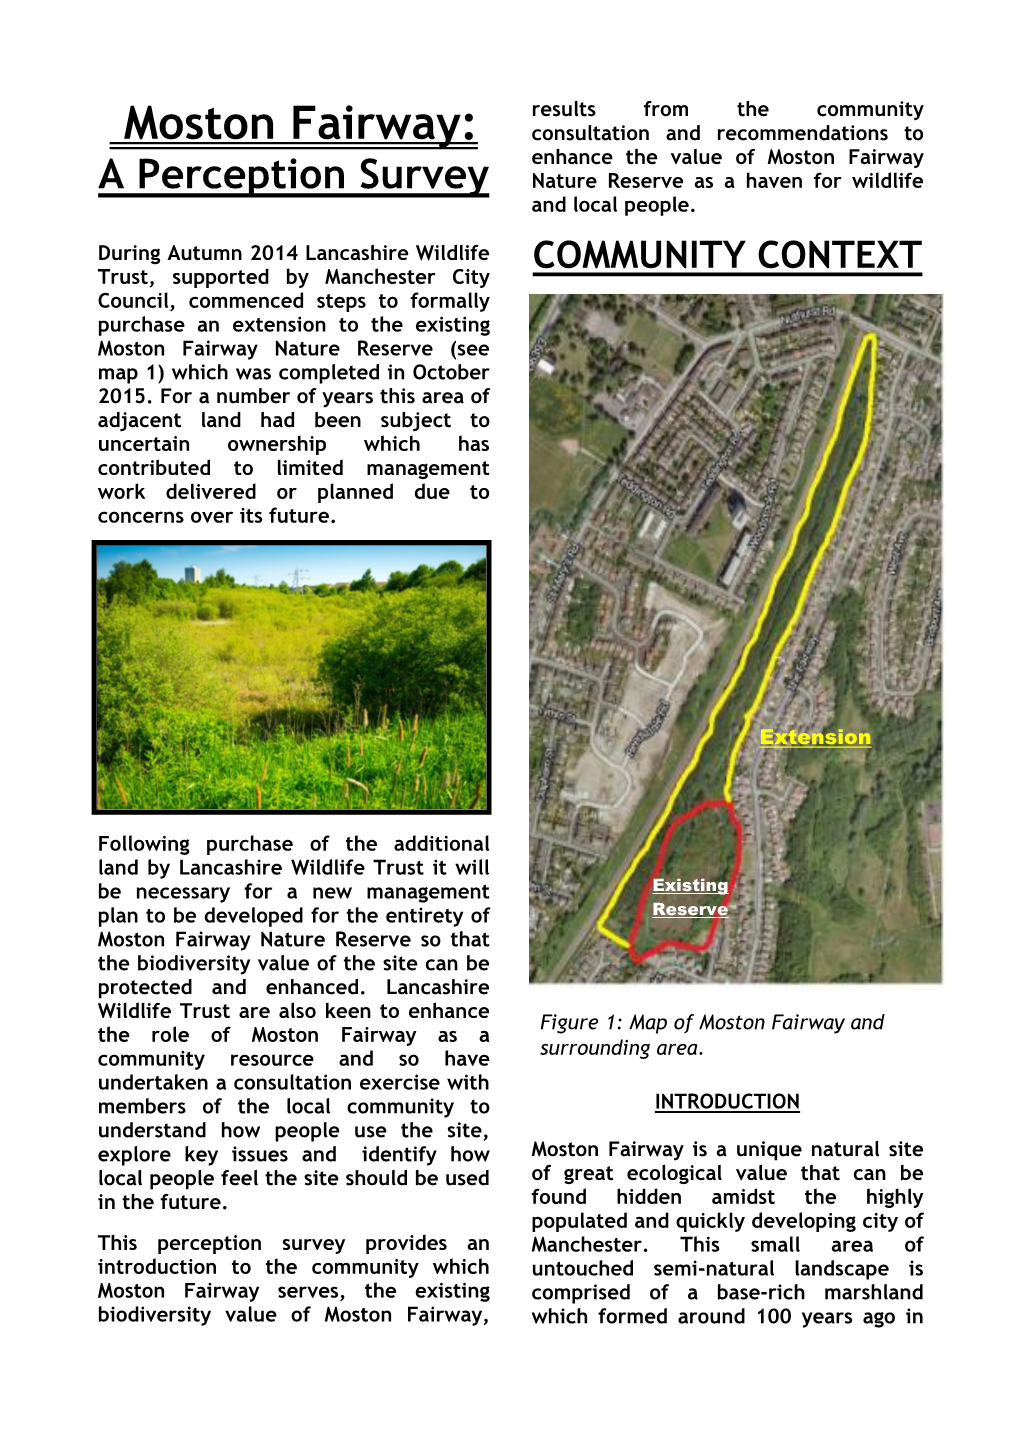 Moston Fairway: Consultation and Recommendations to Enhance the Value of Moston Fairway a Perception Survey Nature Reserve As a Haven for Wildlife and Local People